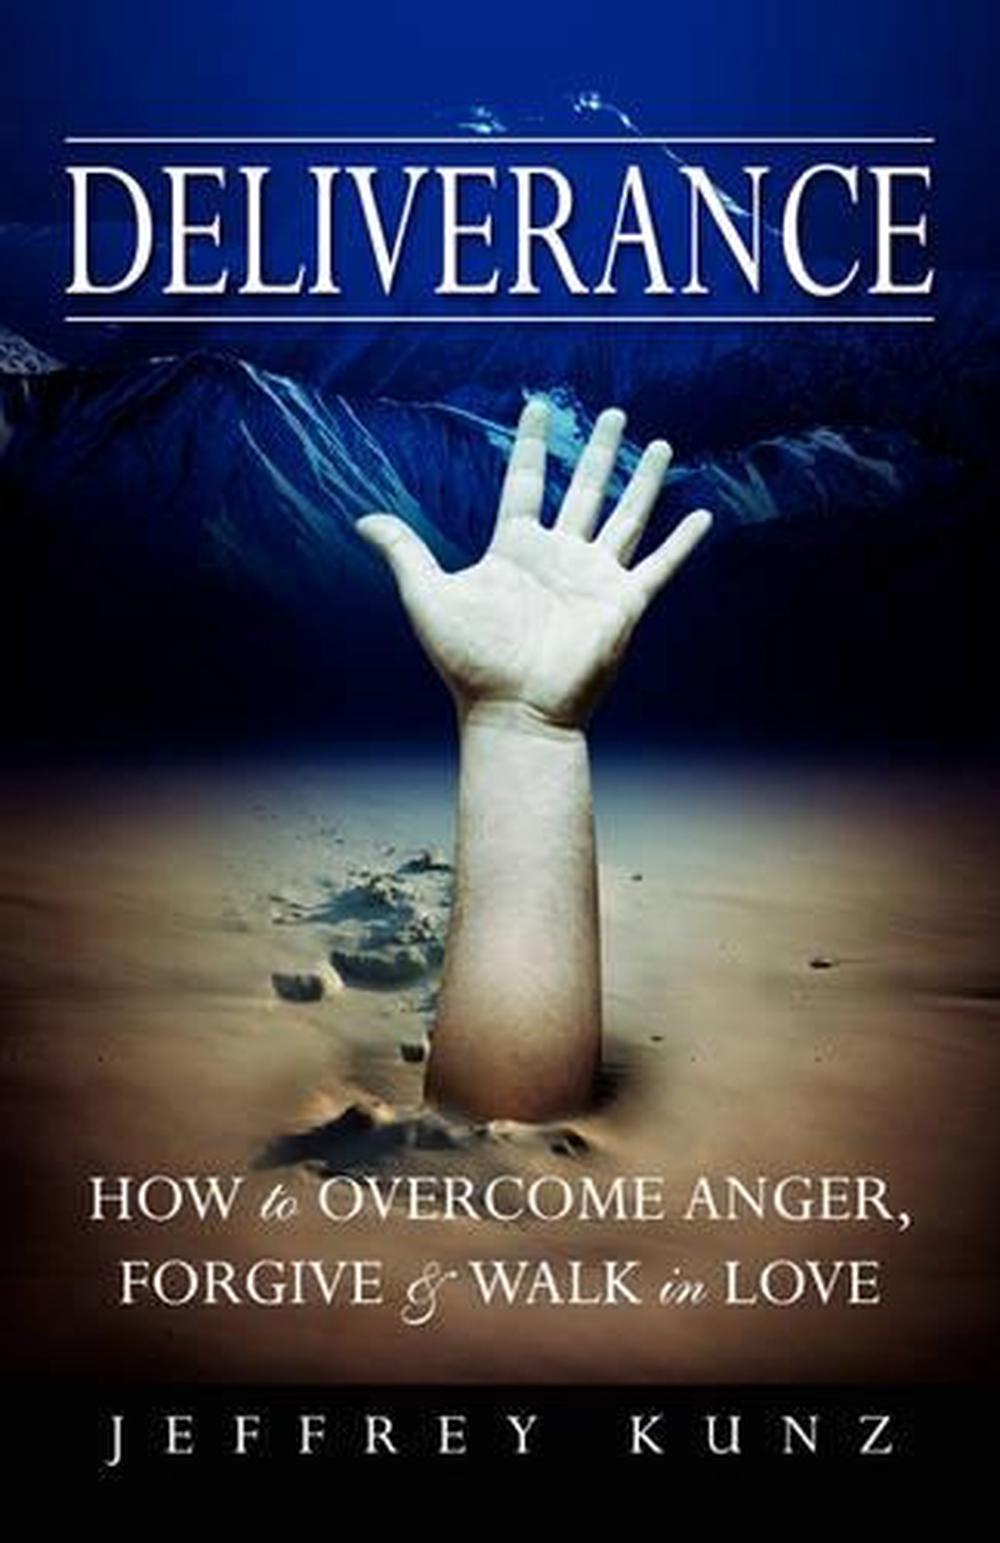 a great deliverance book review